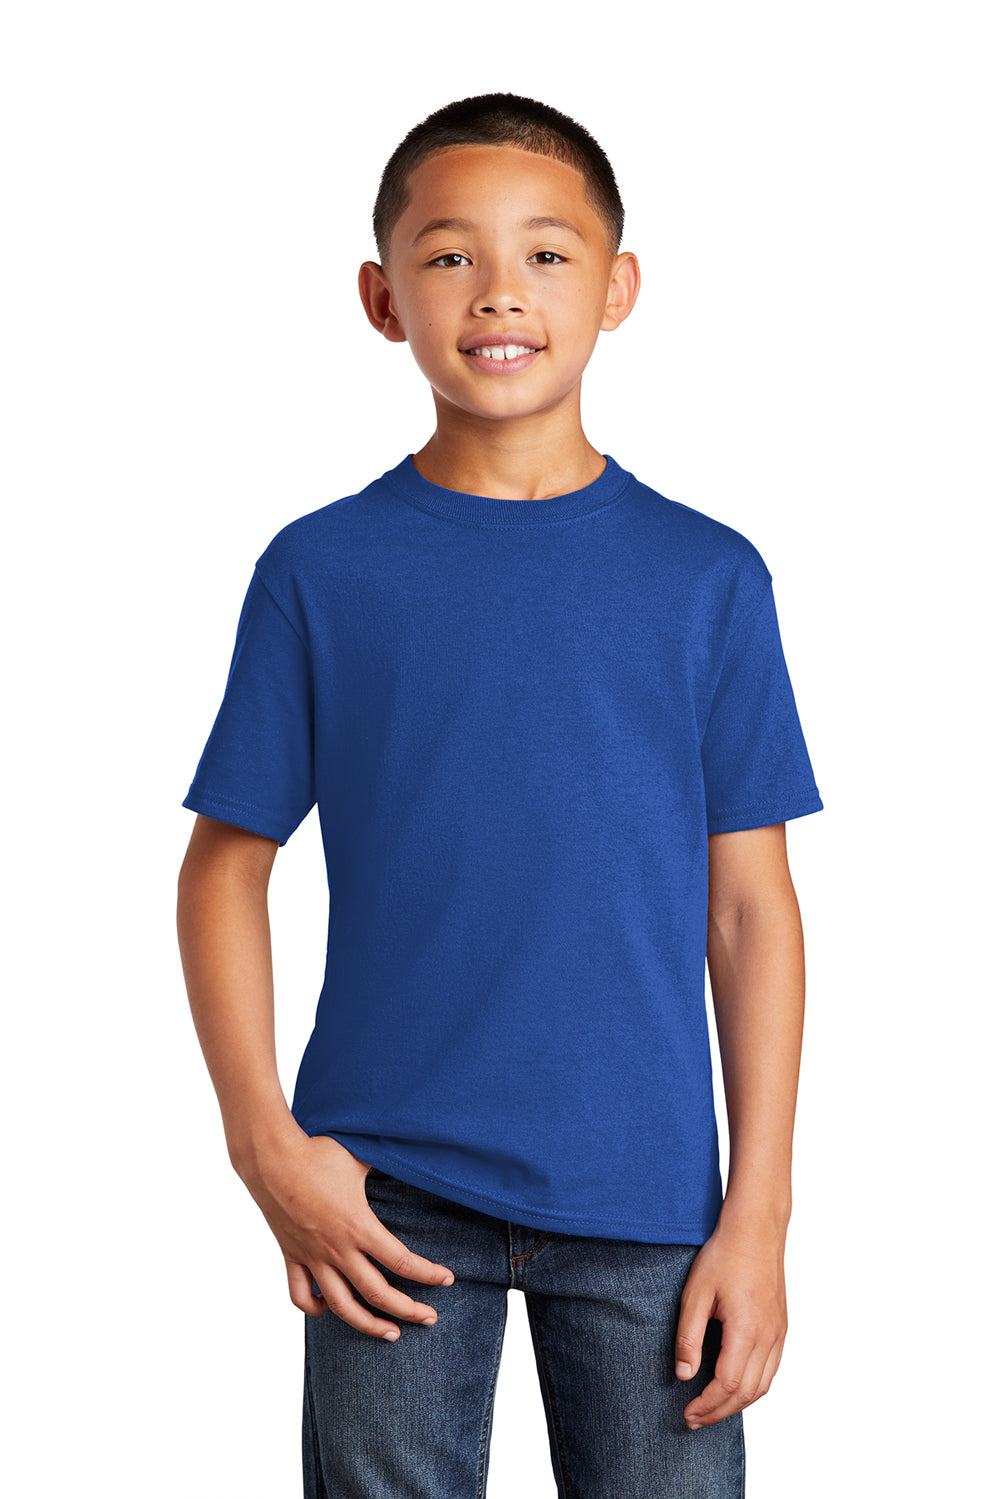 Port & Company PC54Y Youth Core Short Sleeve Crewneck T-Shirt True Royal Blue Front